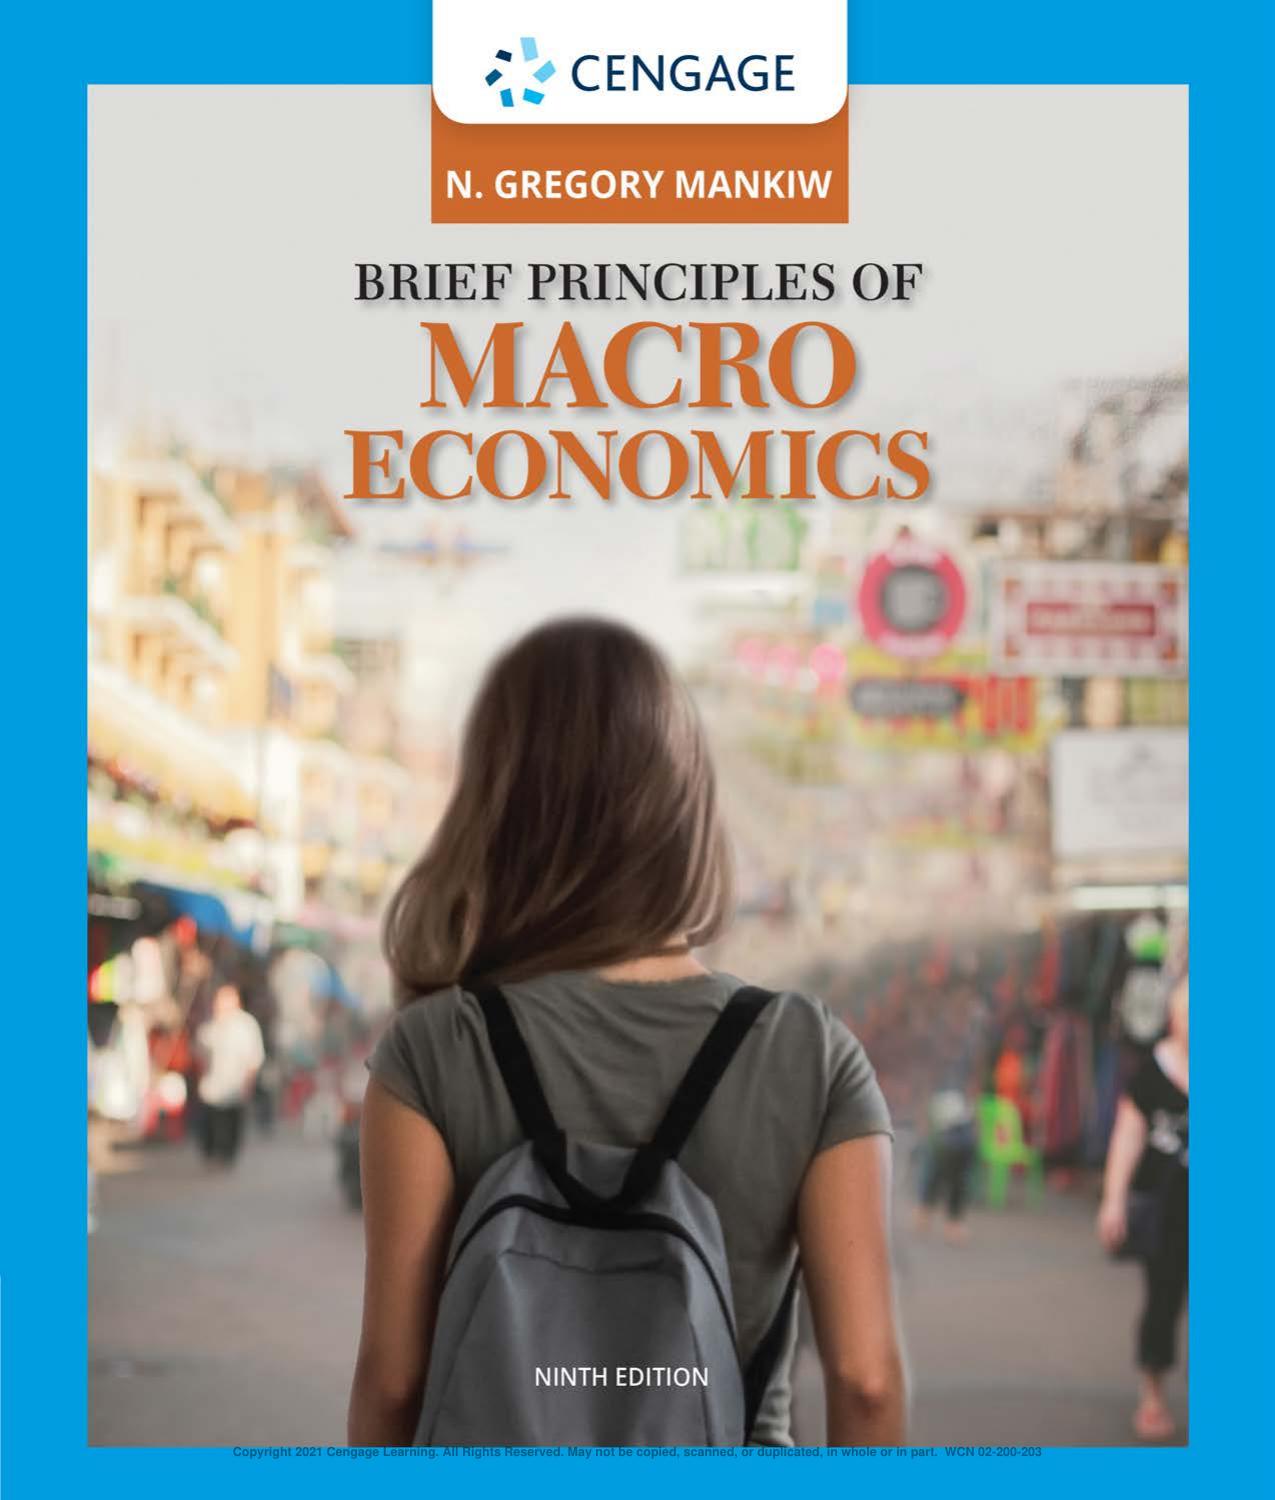 Brief principles of macroeconomics by N. Gregory Mankiw 9th ed 2021